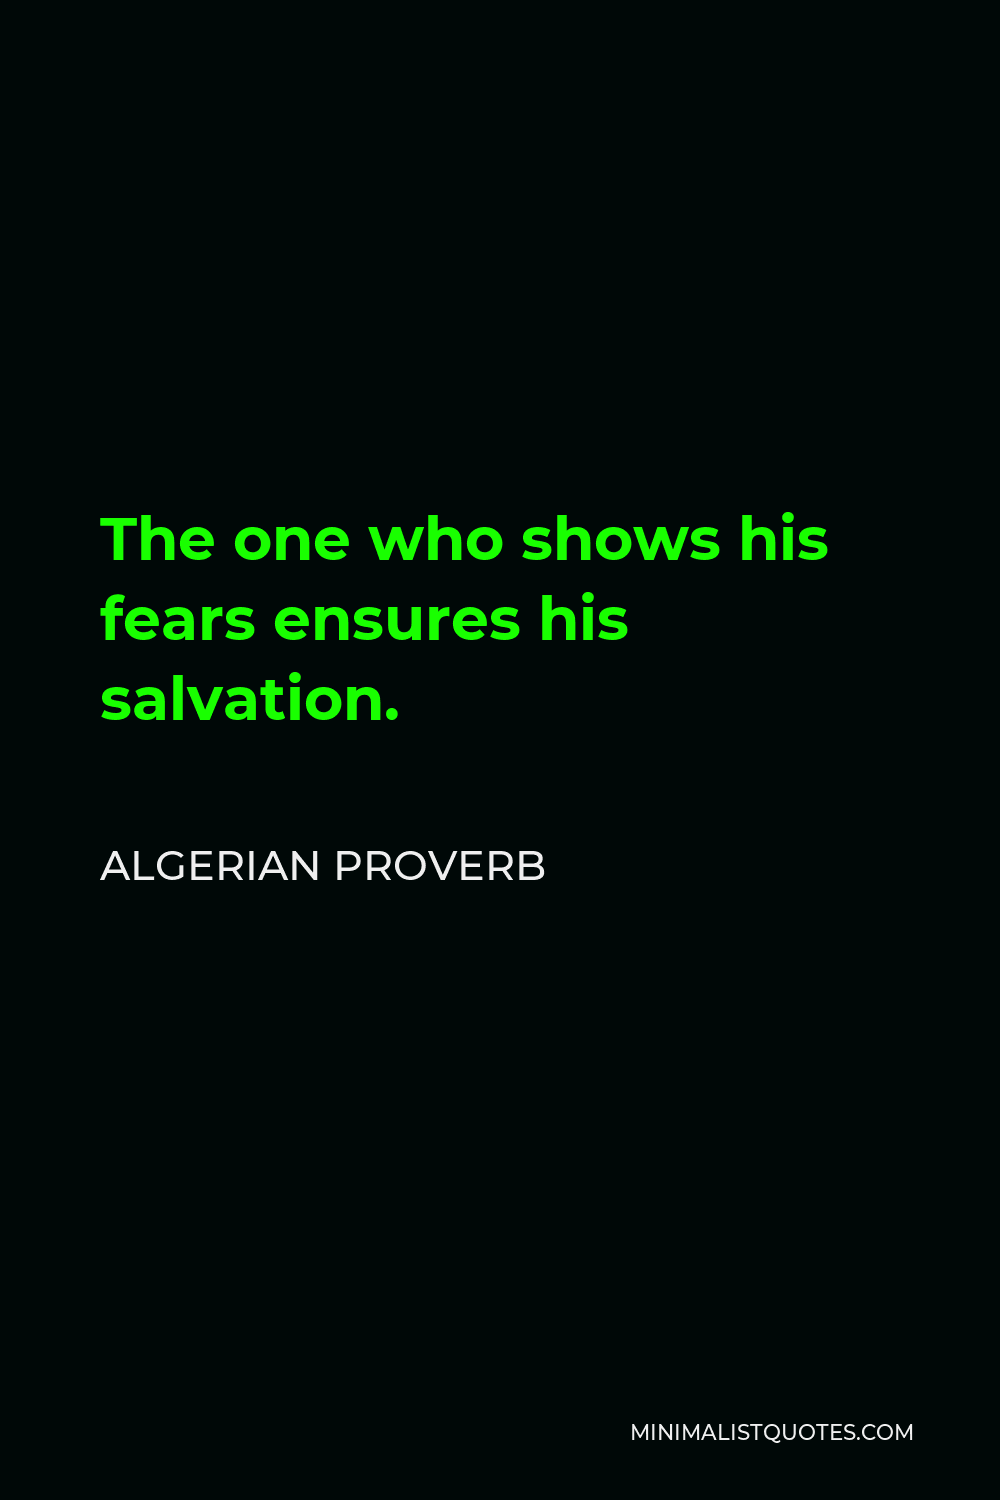 Algerian Proverb Quote - The one who shows his fears ensures his salvation.